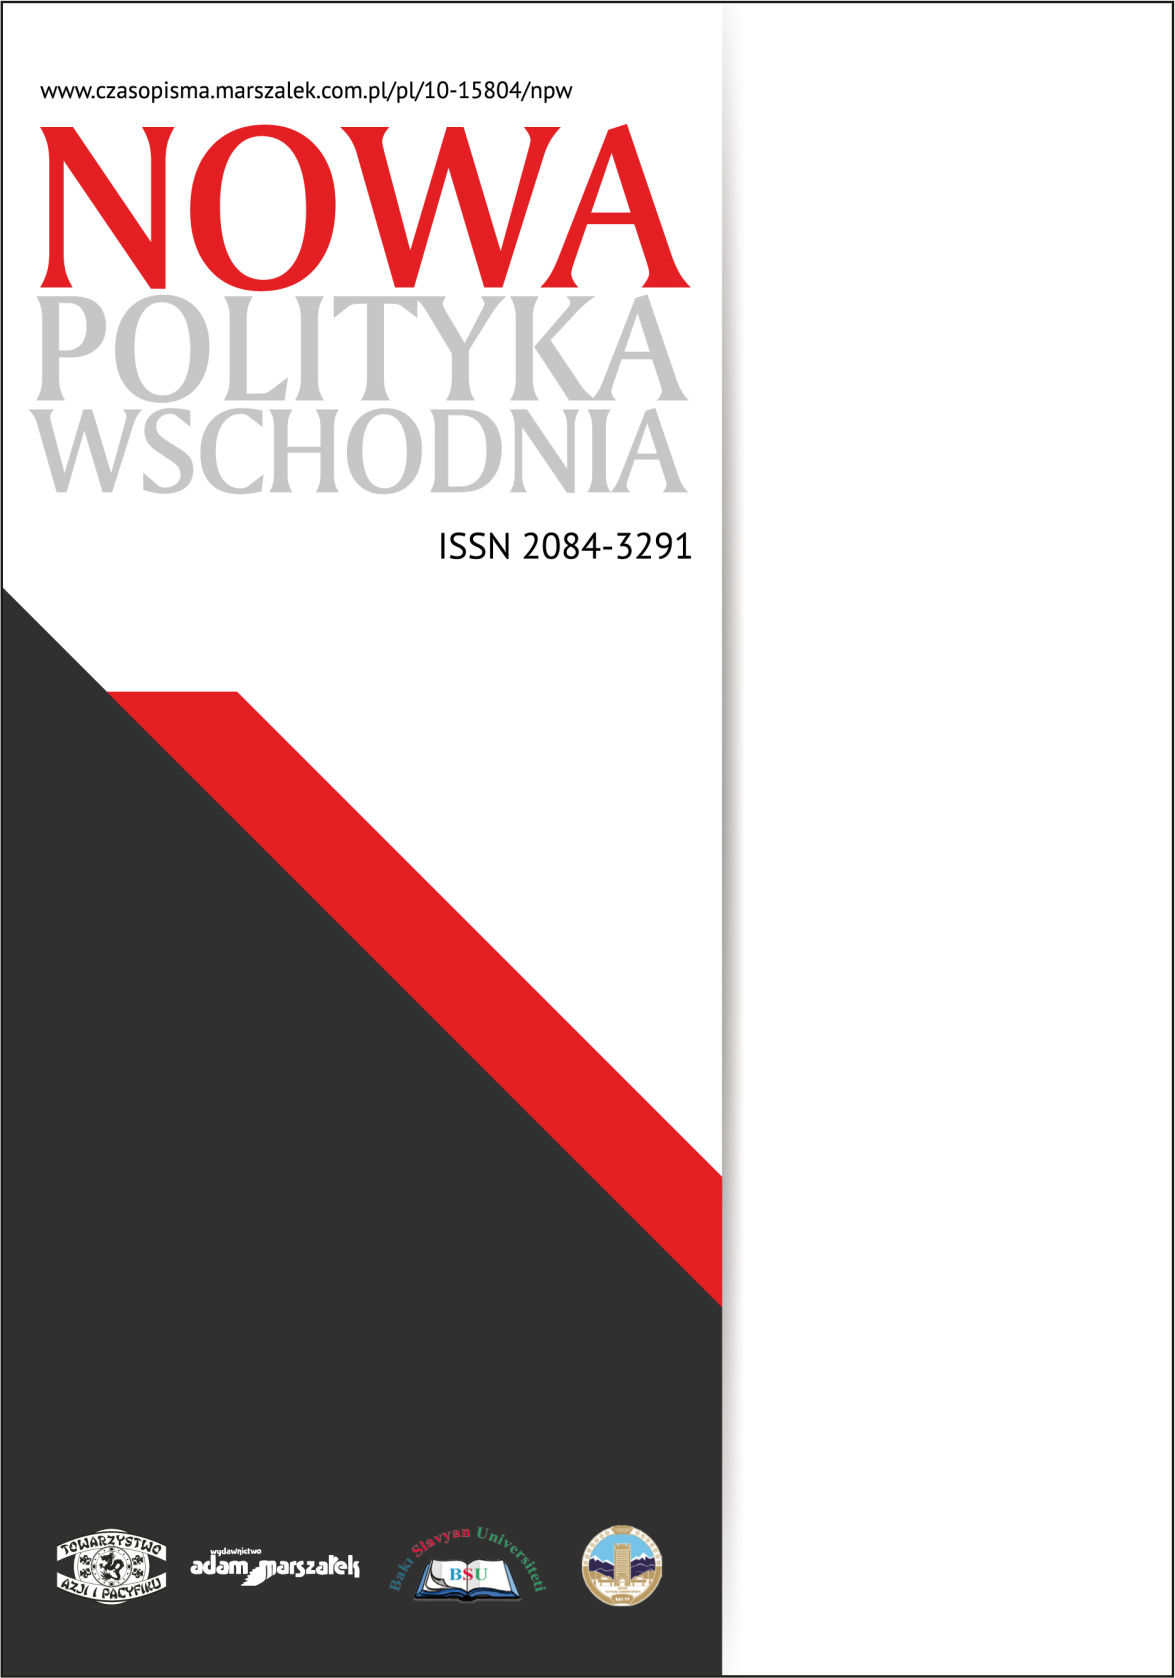 Youth councils and their participation on the decision-making process on a local level in Poland Cover Image